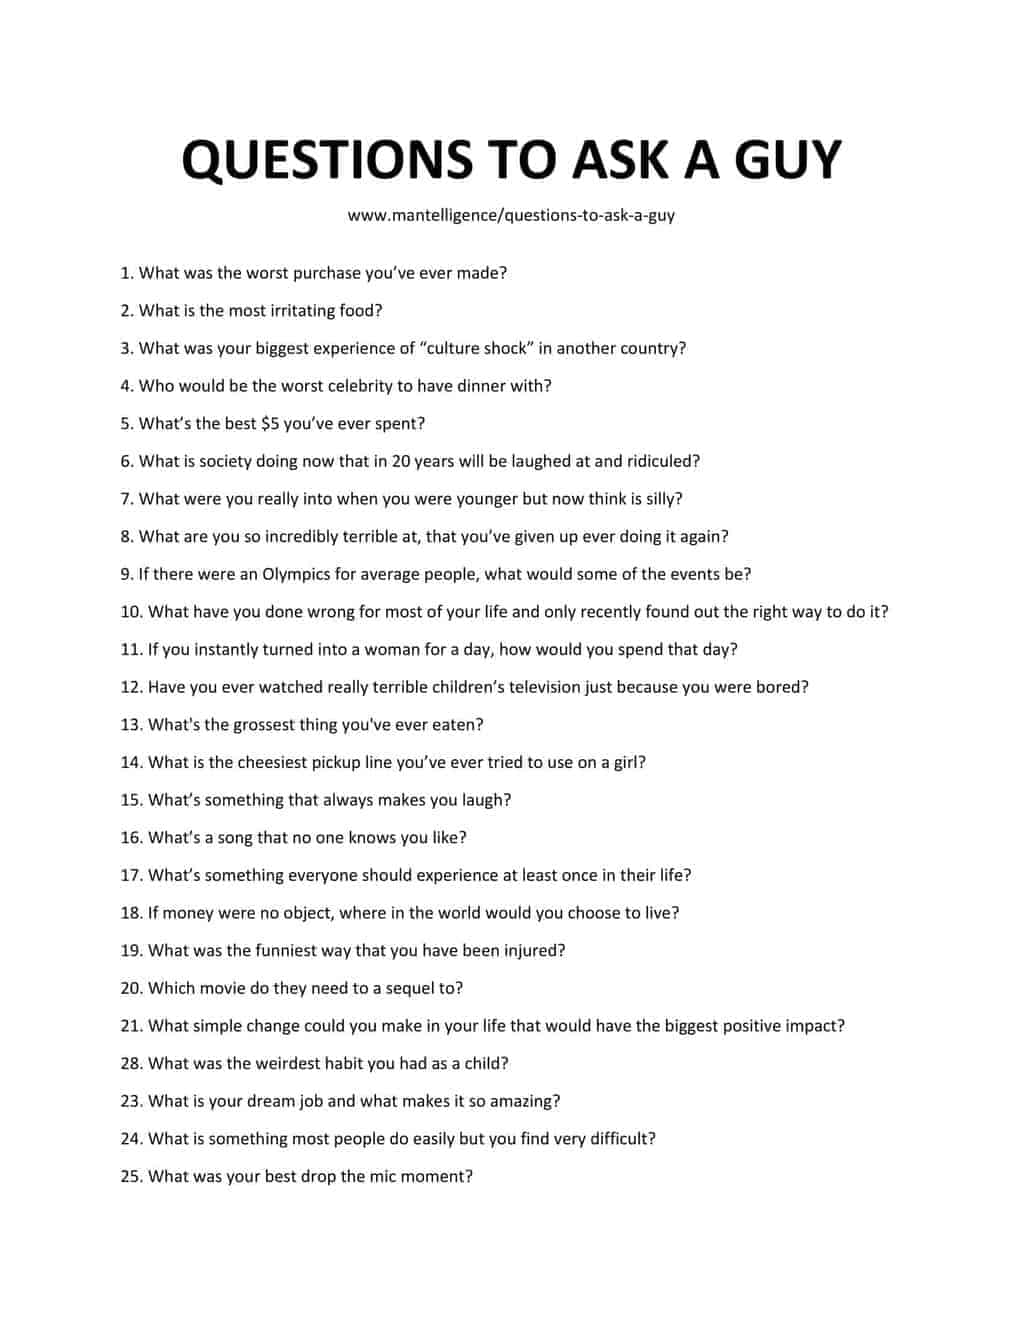 Kind a ask guy questions what to of Deep Questions